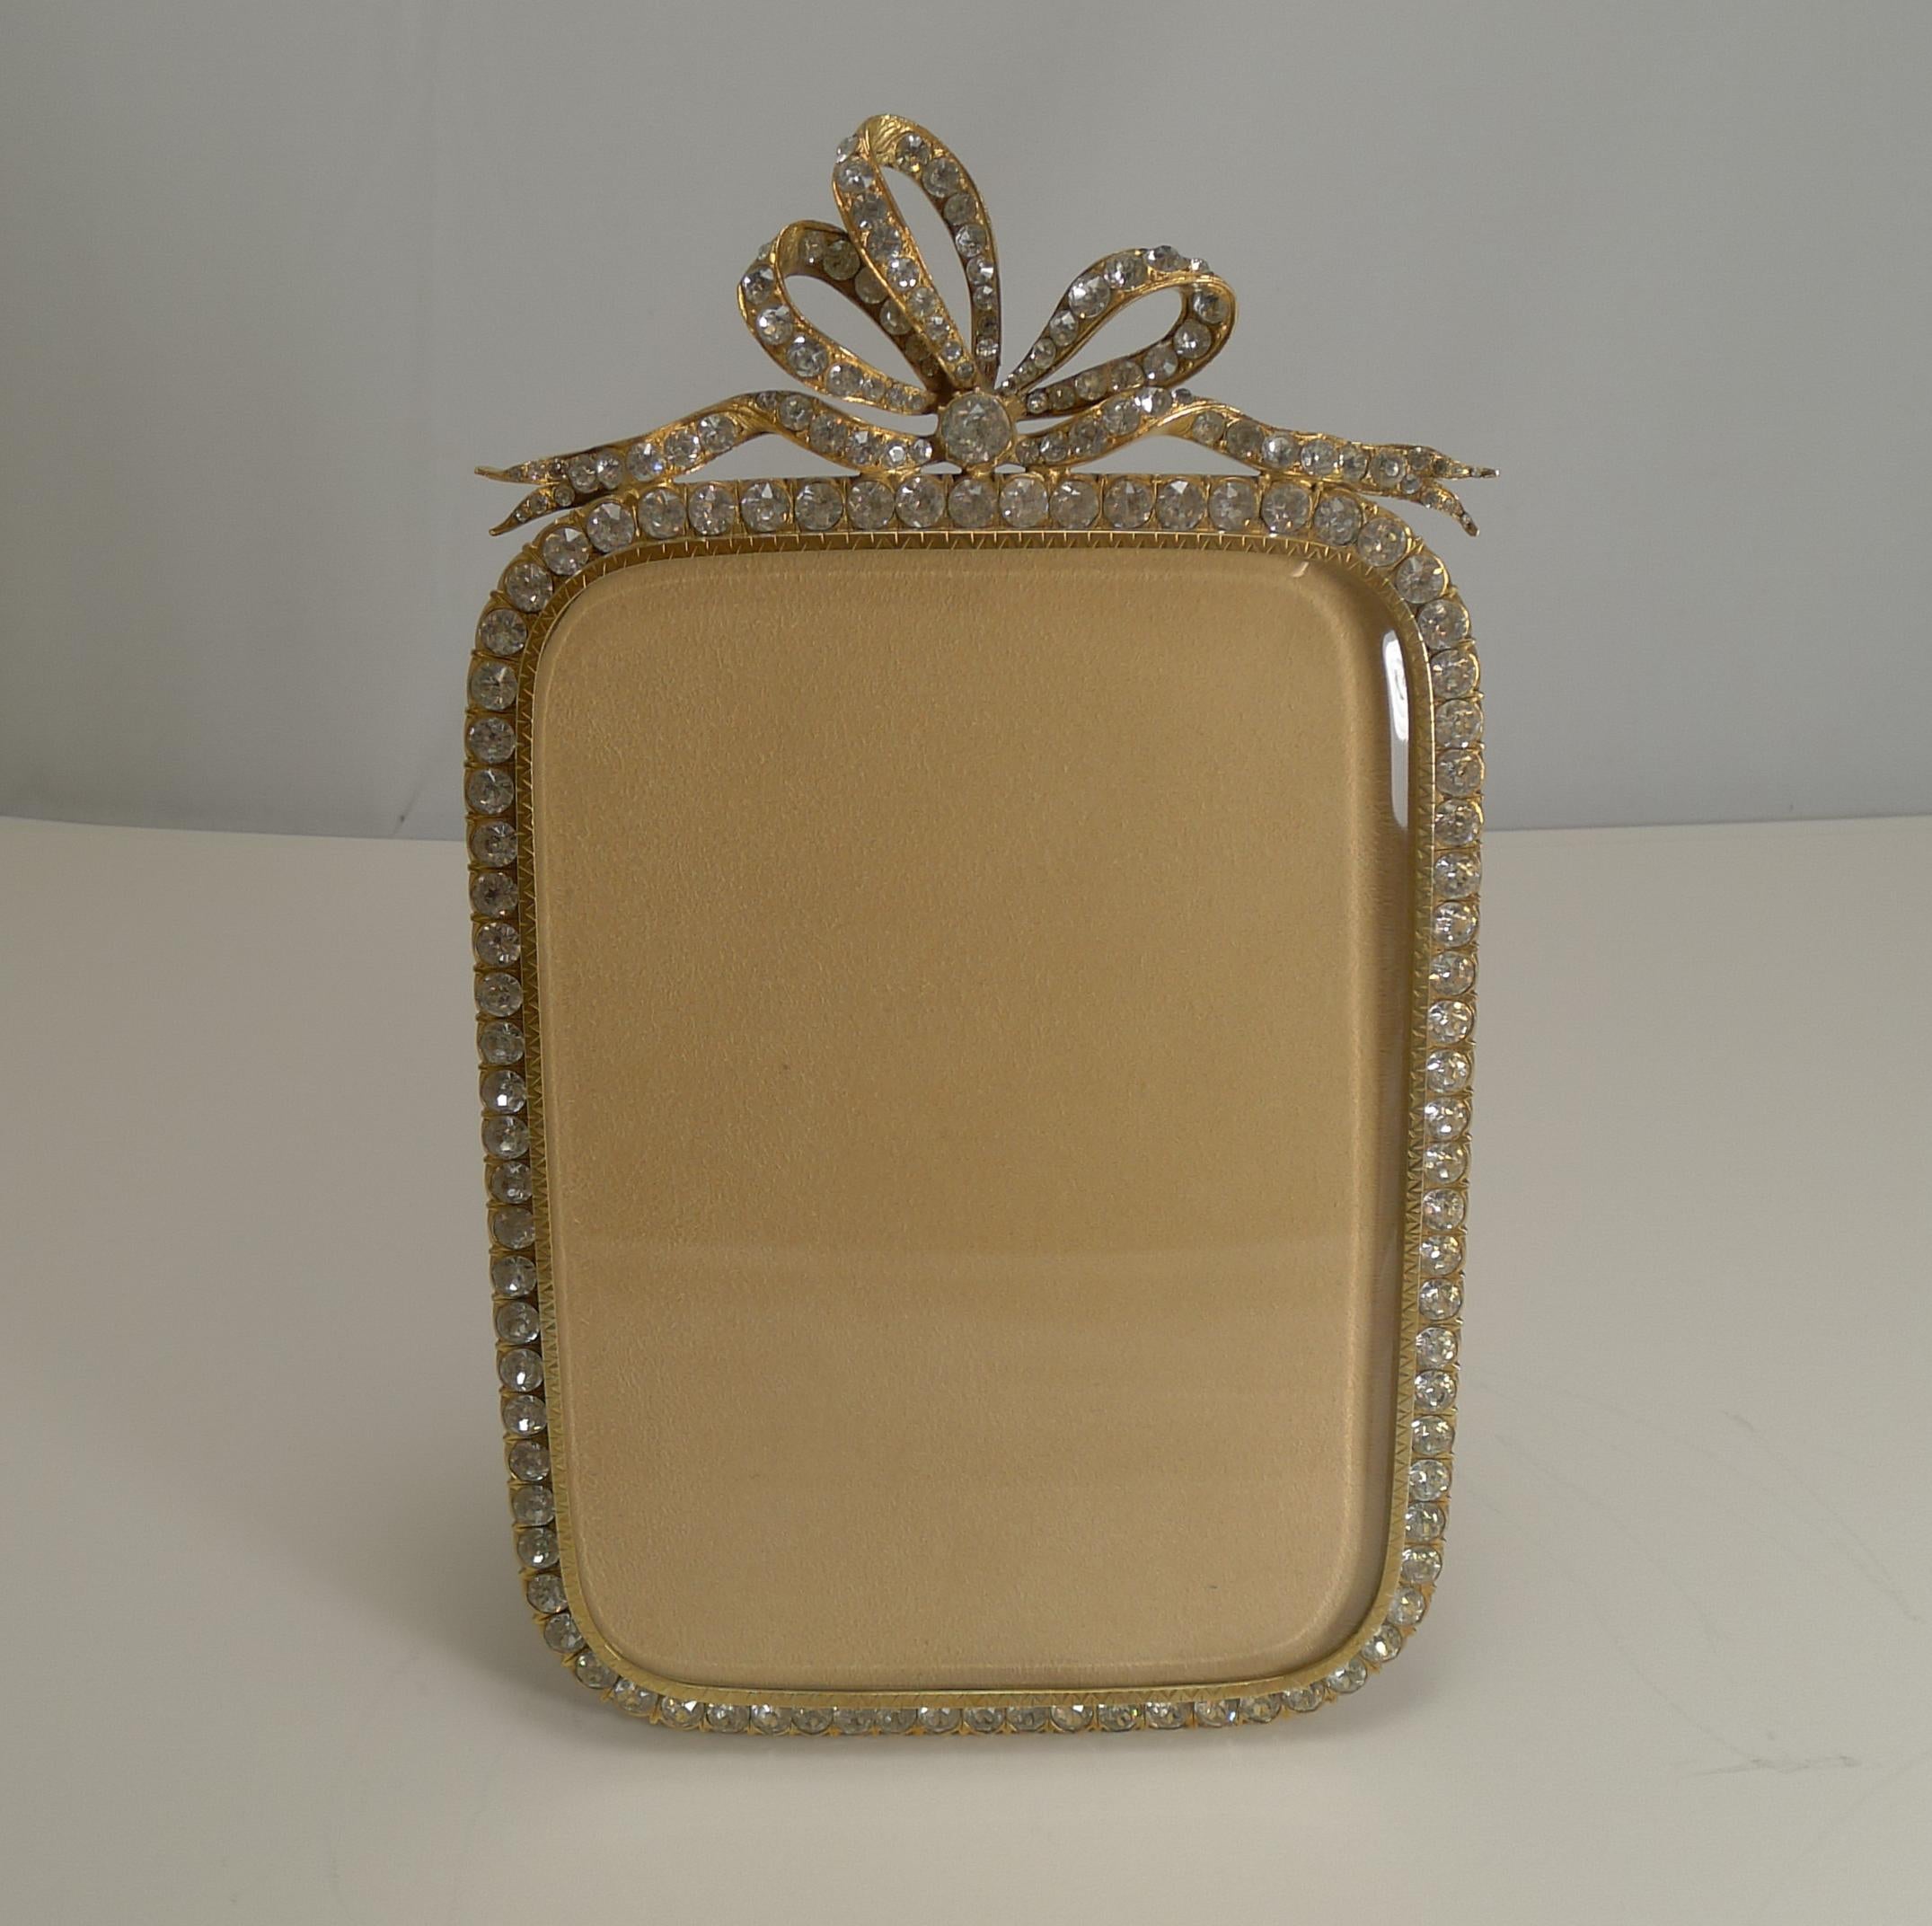 A rare and fabulous large photograph frame made from gilded bronze, a good solid frame smothered in gold and inset with sparkling soft paste stones creating a piece of Hollywood glamour.

The top is crowned by a singe large tied ribbon and bow,